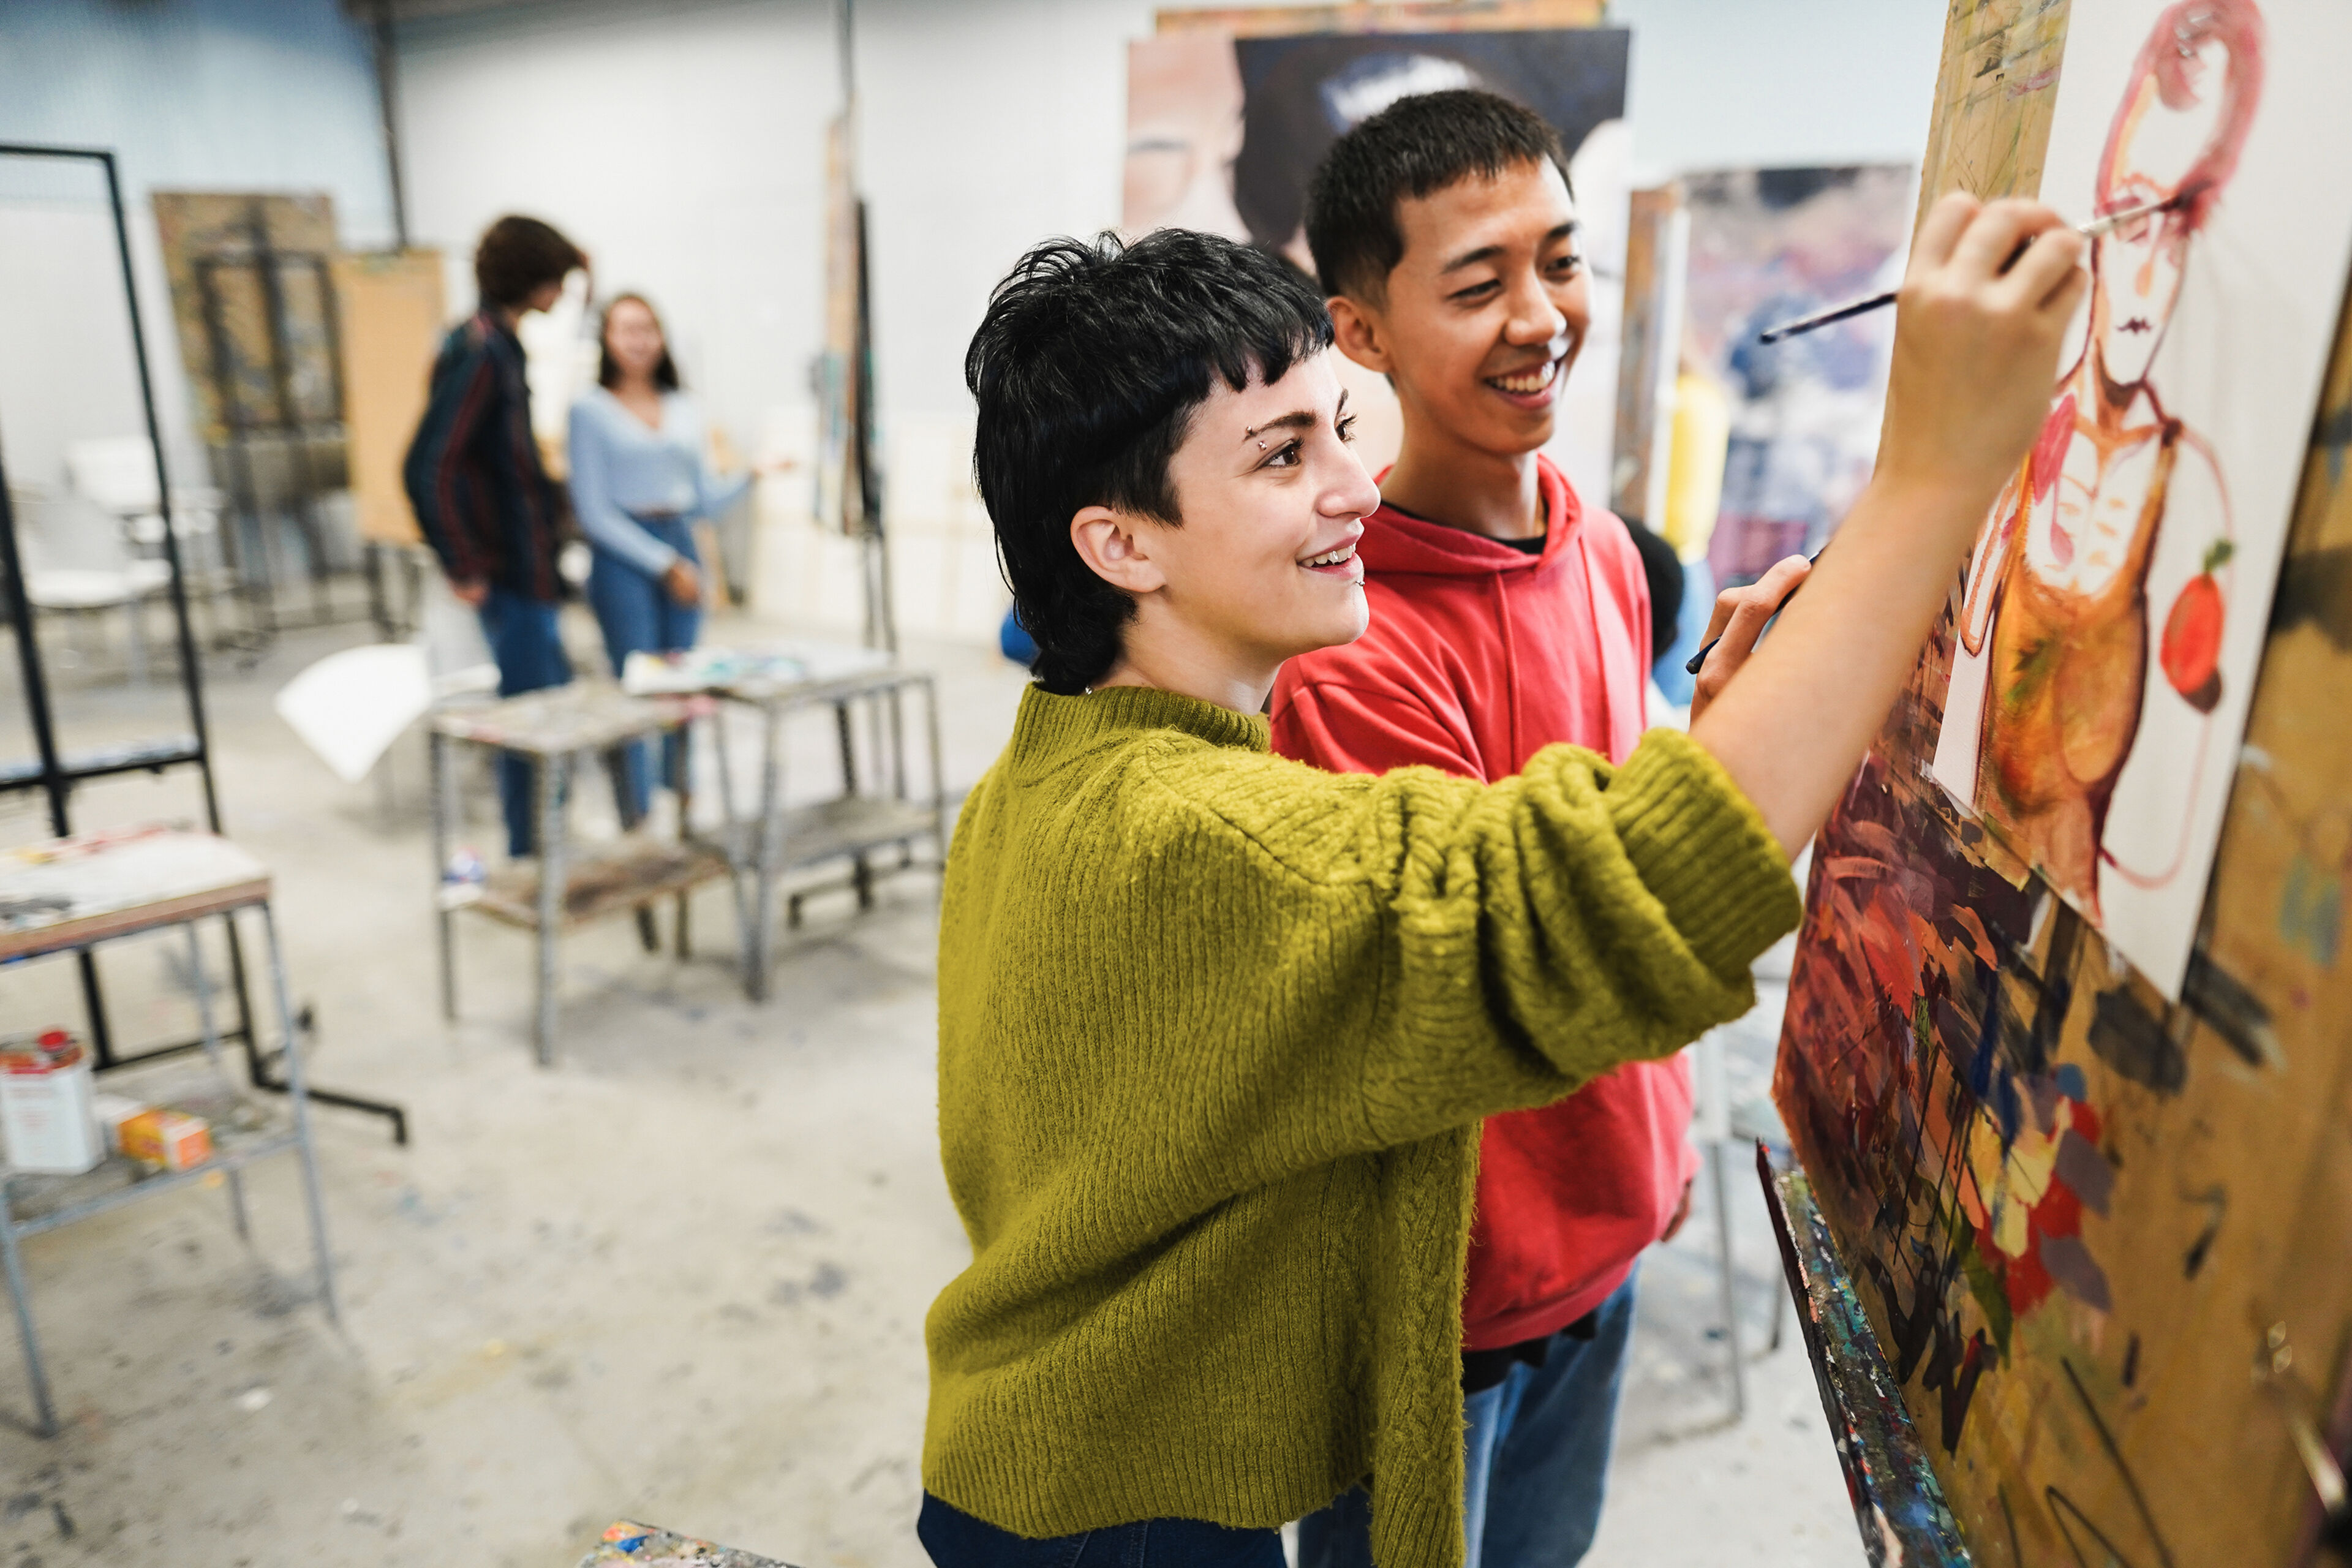 Two joyful students collaborate on a vibrant painting in an art studio.